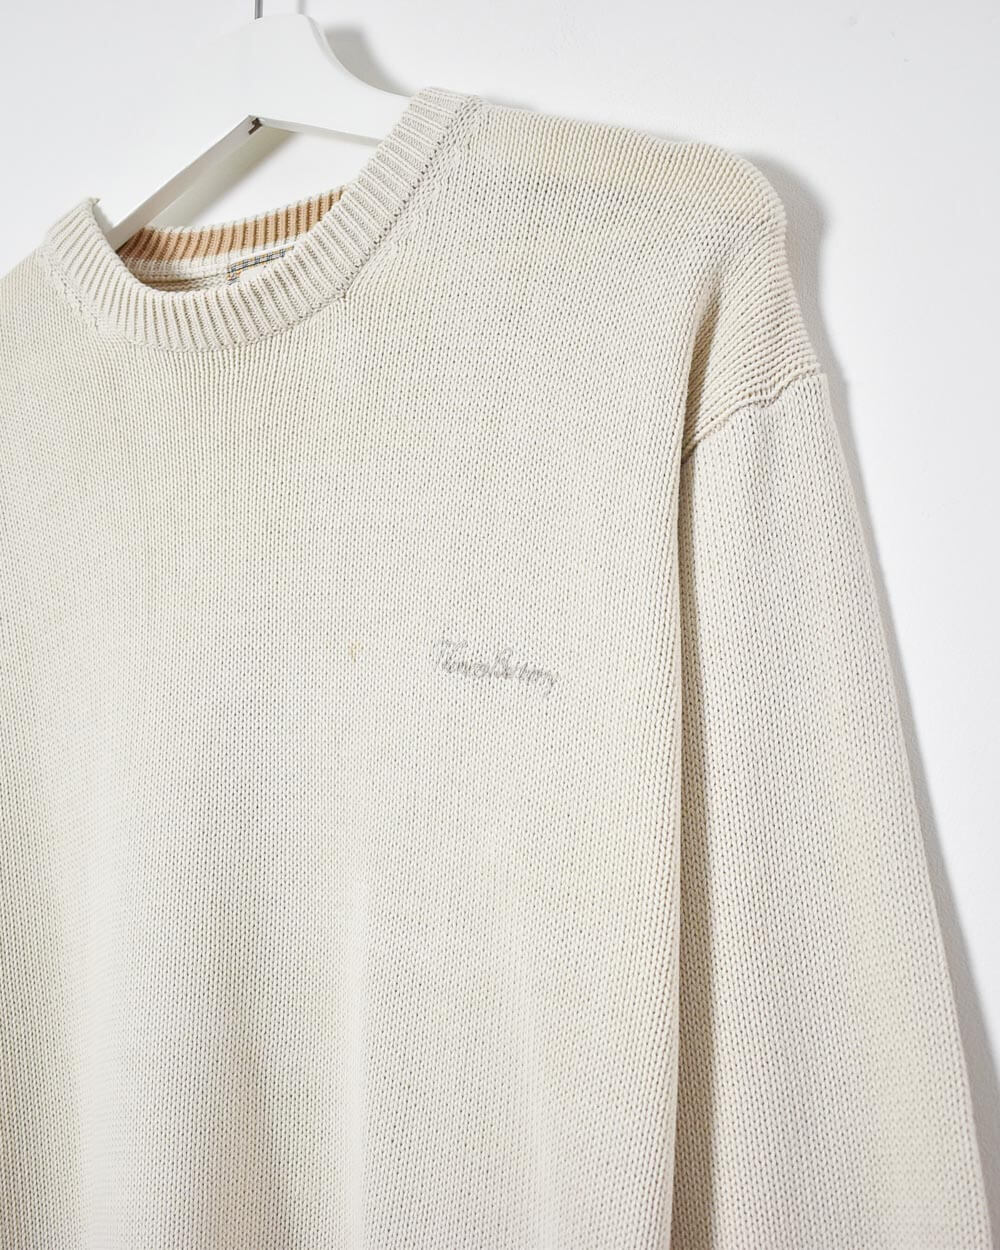 Thomas Burberry Knitted Sweatshirt - Small - Domno Vintage 90s, 80s, 00s Retro and Vintage Clothing 